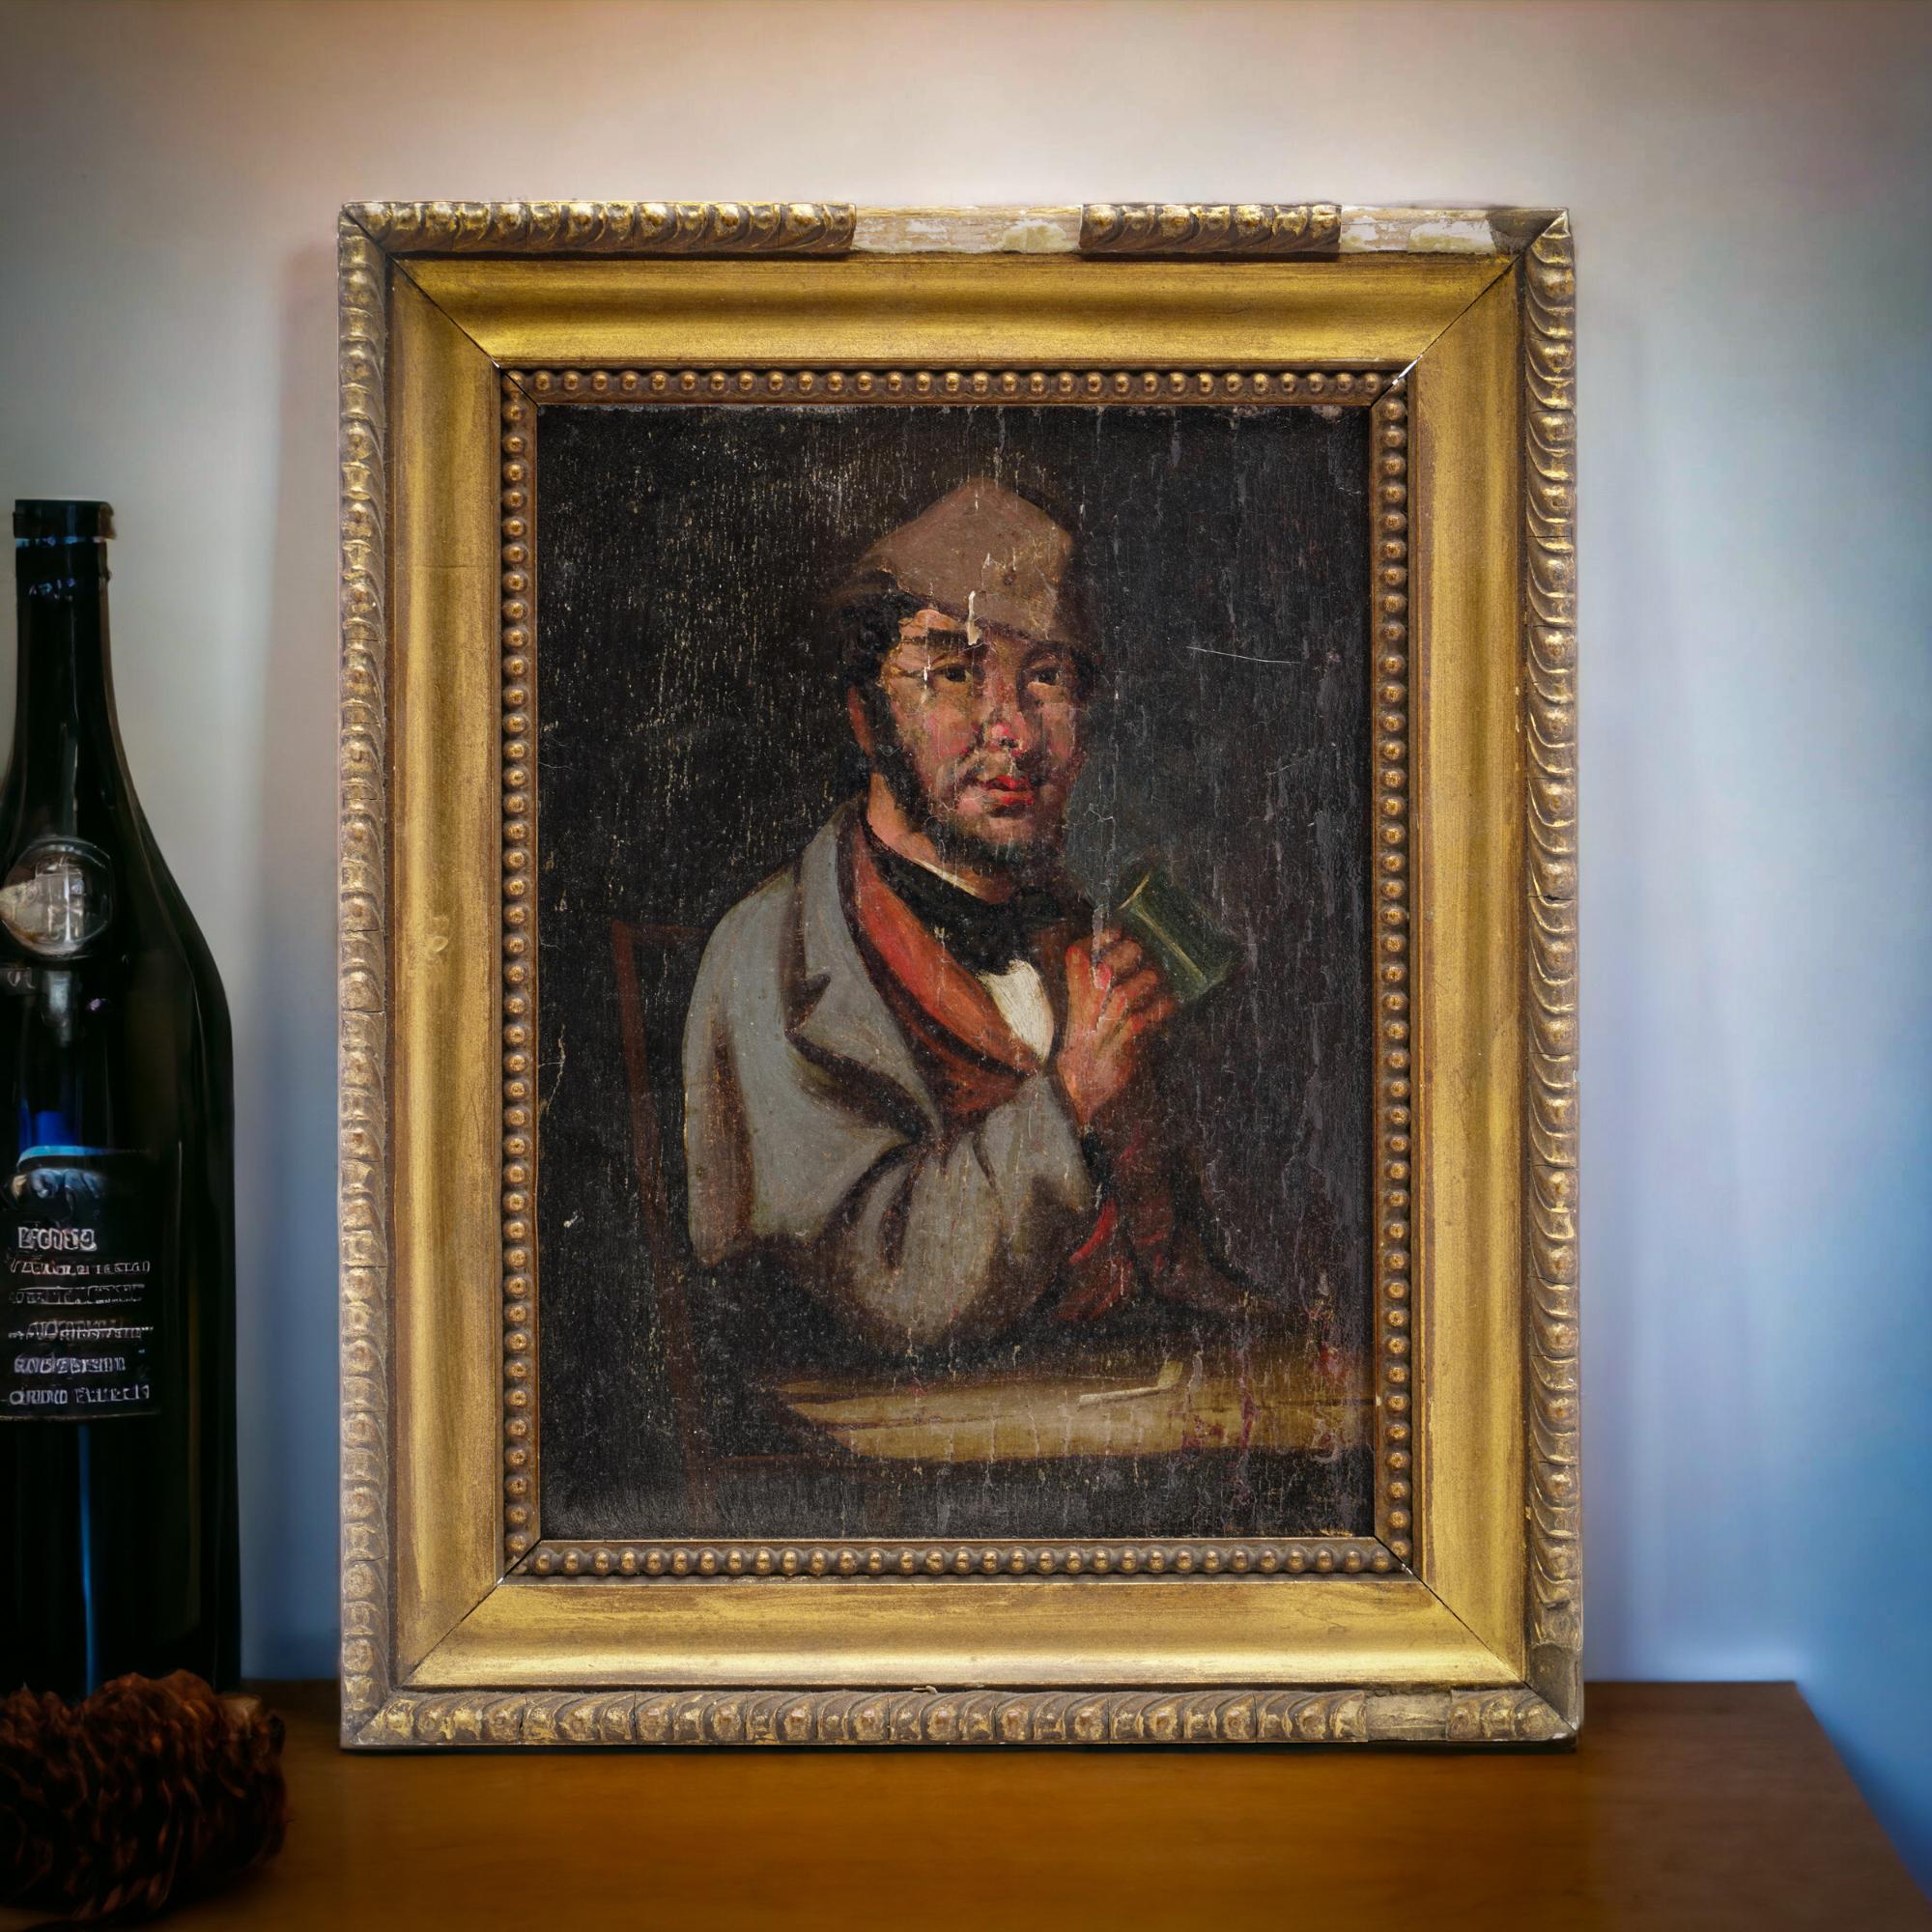 19th-century oil on wood panel painting featuring a man in a tavern.

This oil painting, delicately rendered on a wooden panel, captures a captivating scene from the 19th century.
The wood panel is framed in a resplendent gilded frame, although it